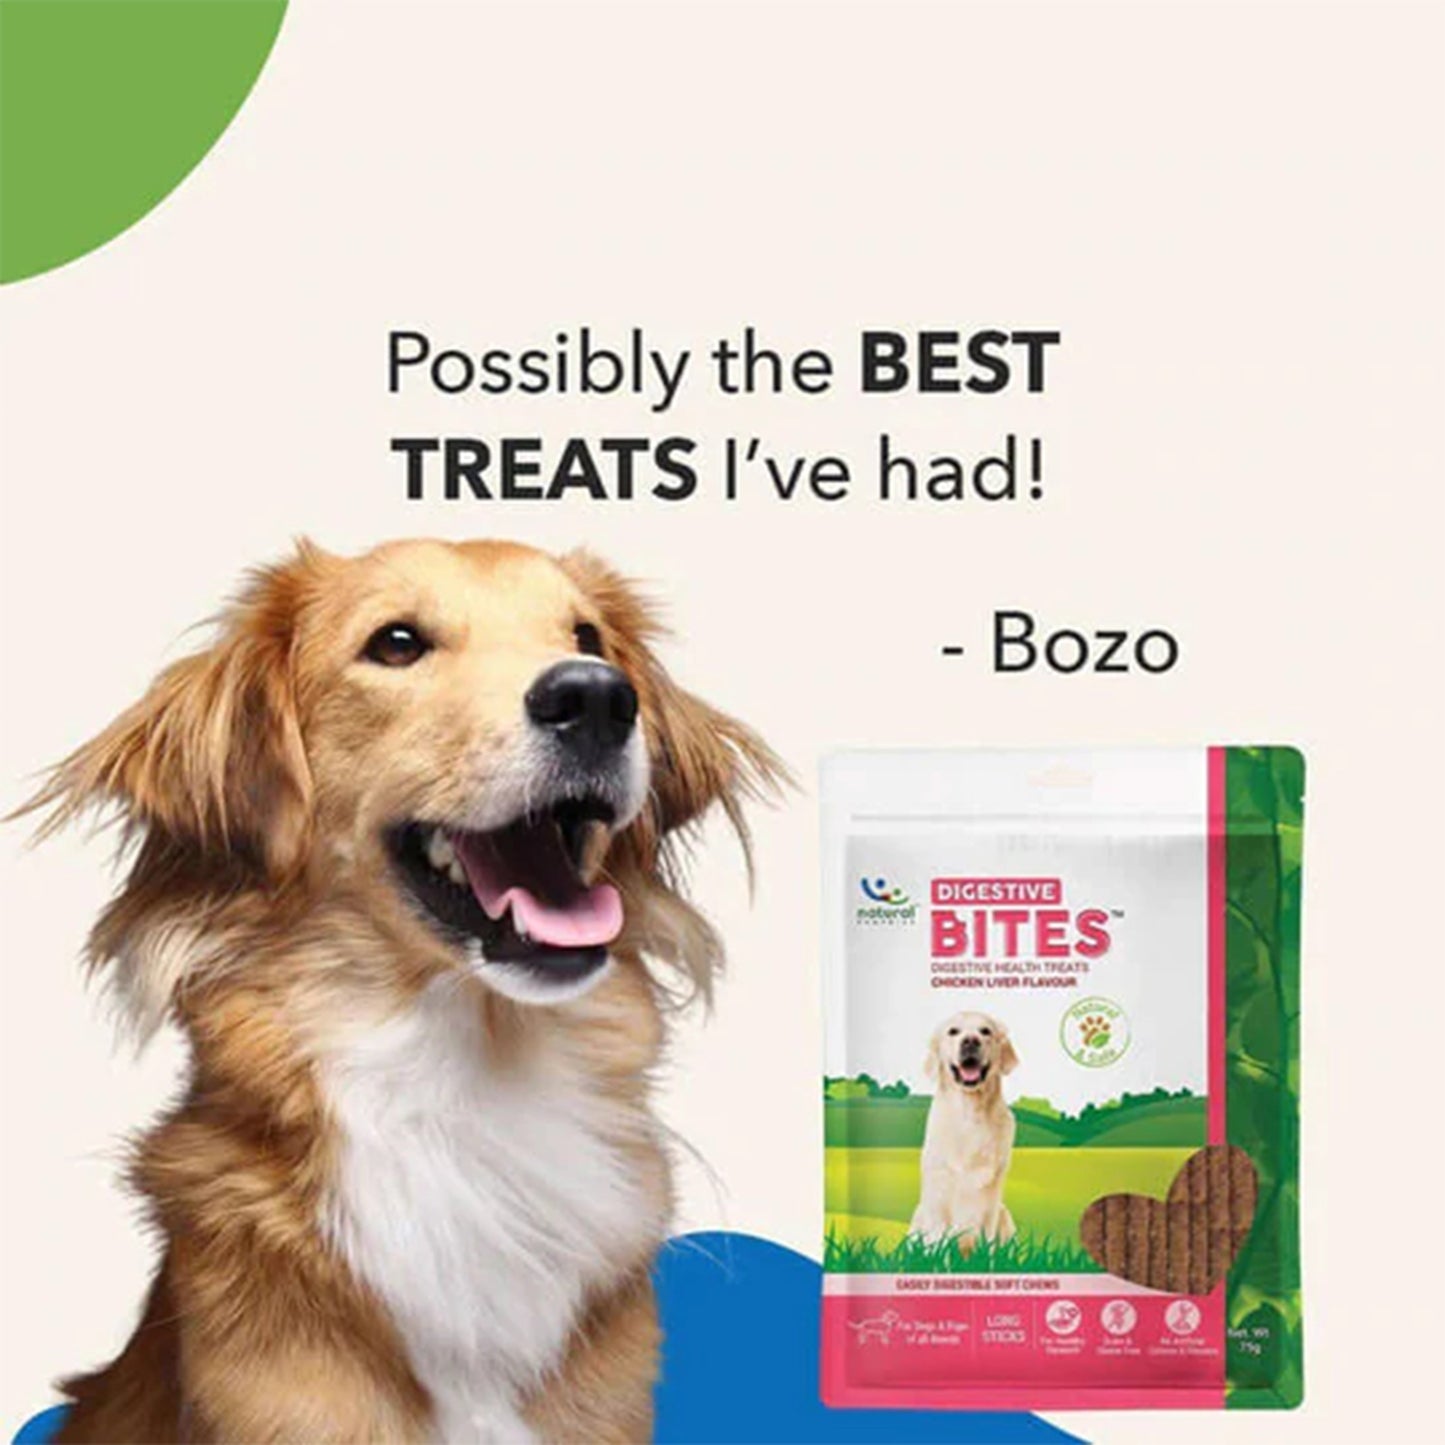 Pet Natural Remedies - Digestive Bites for Dogs